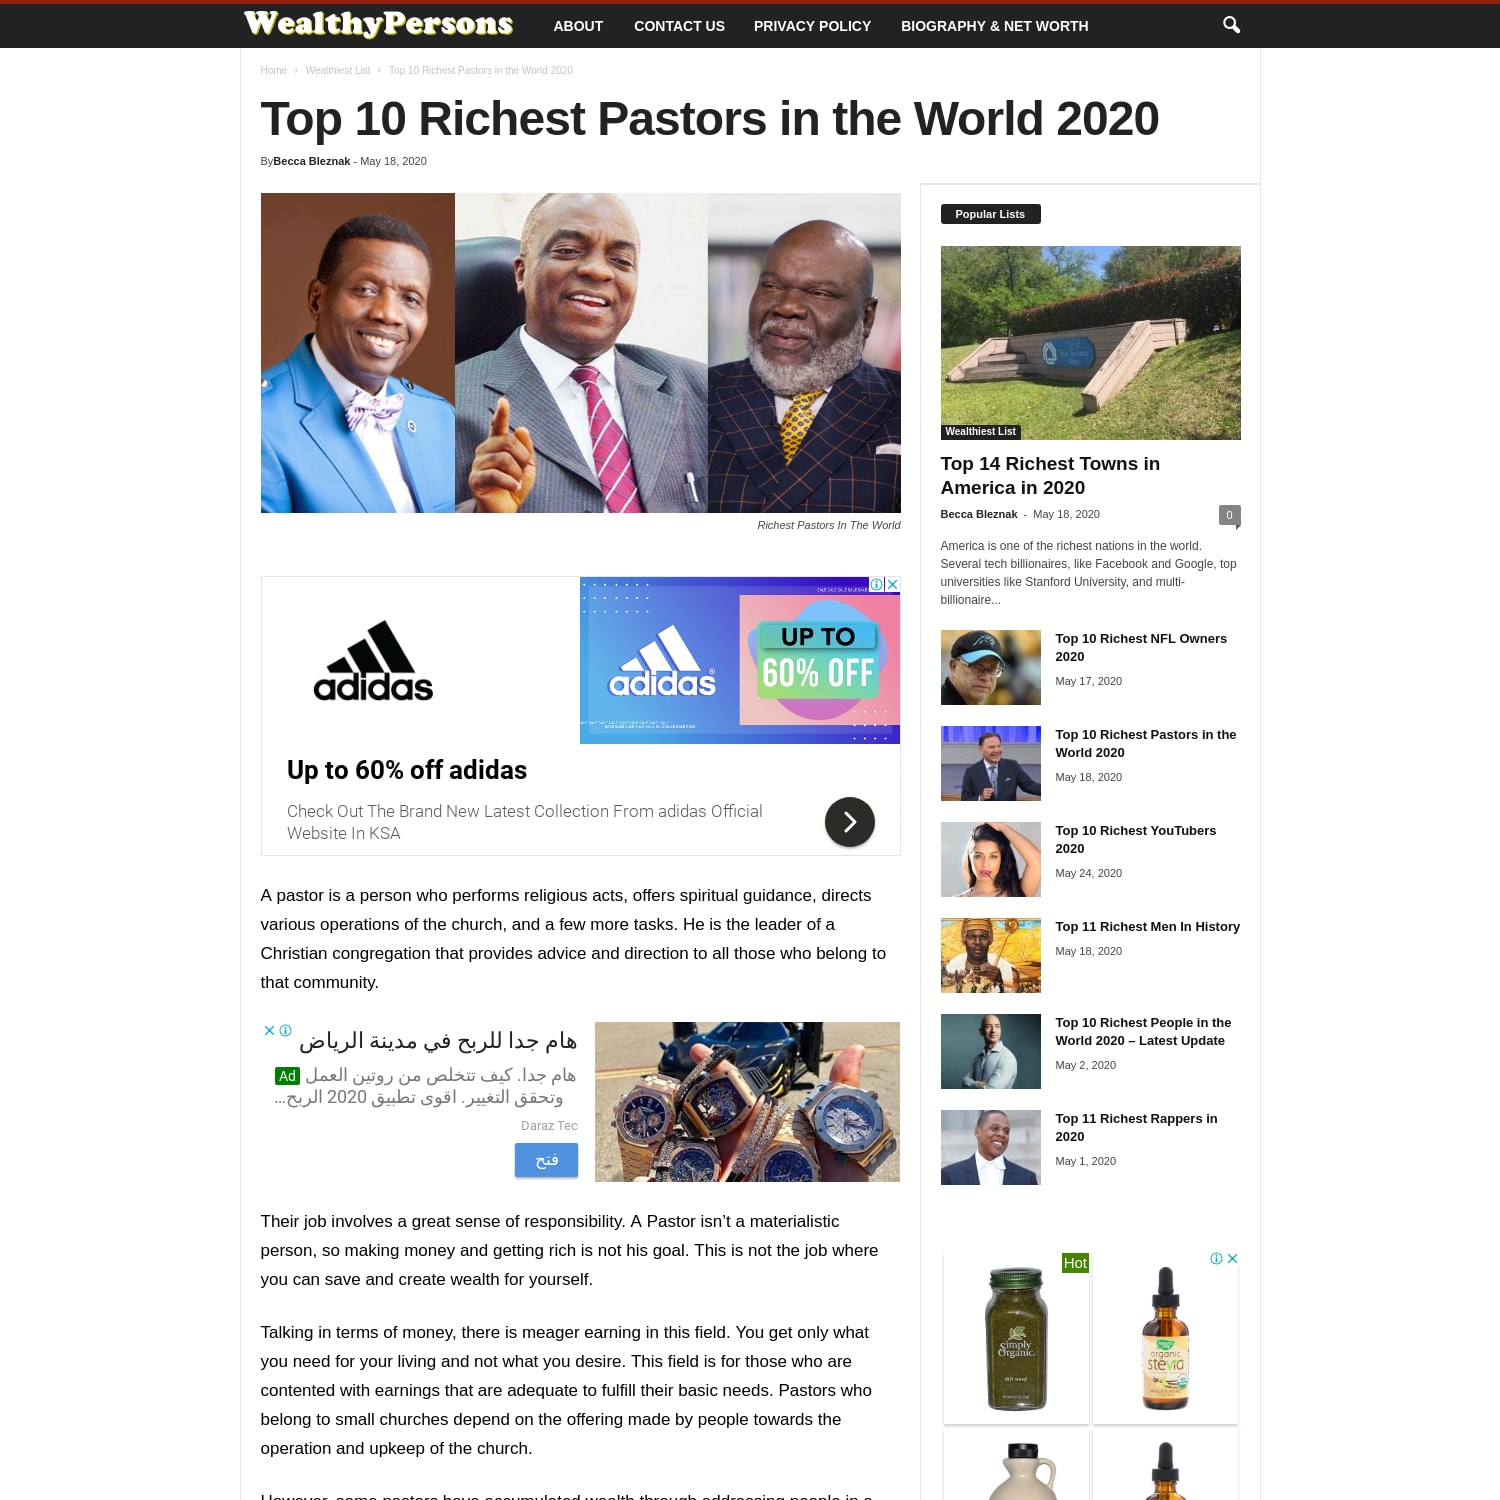 Top 10 Richest Pastors in the World 2020 by Net Worth